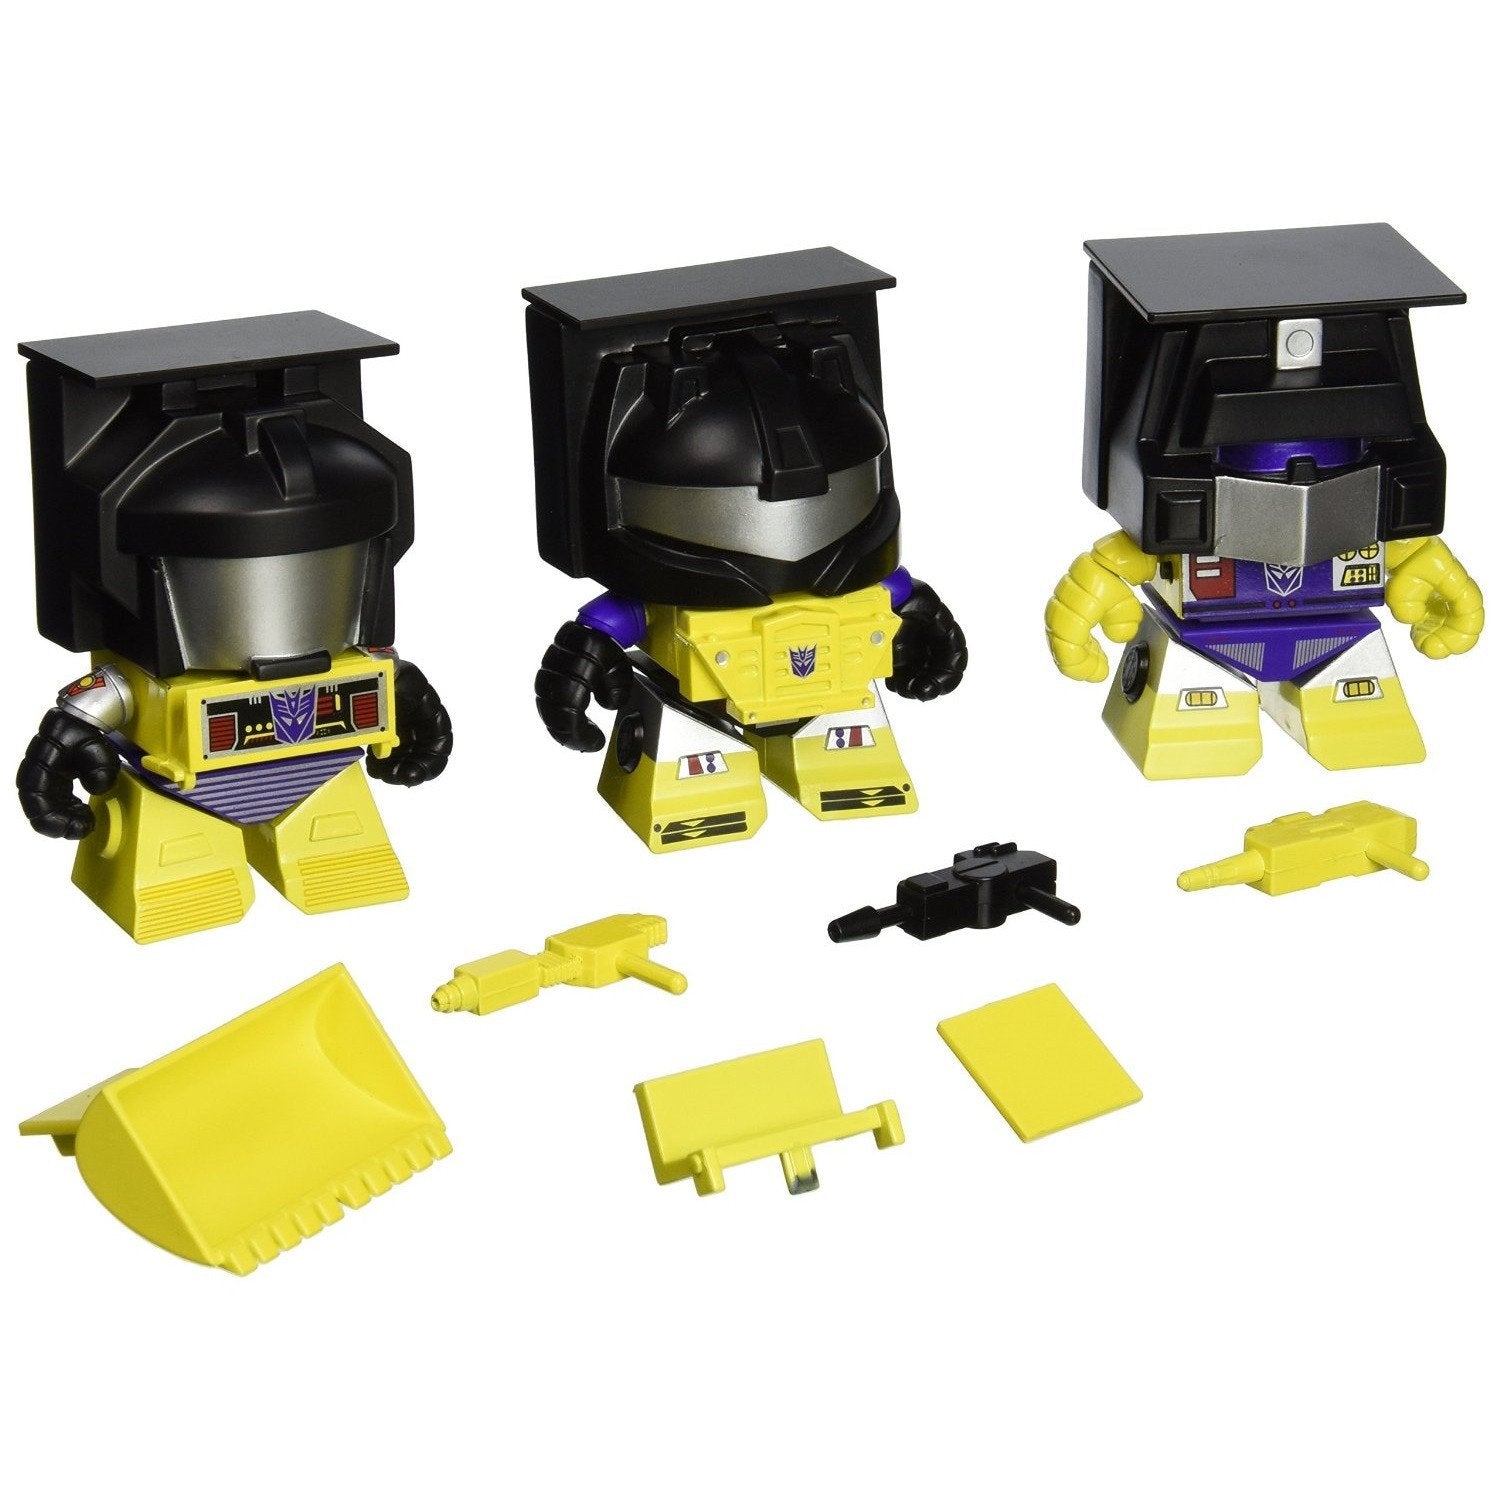 The Loyal Subjects Transformers Yellow Construction 3-Pack 2015 SDCC Exclusive